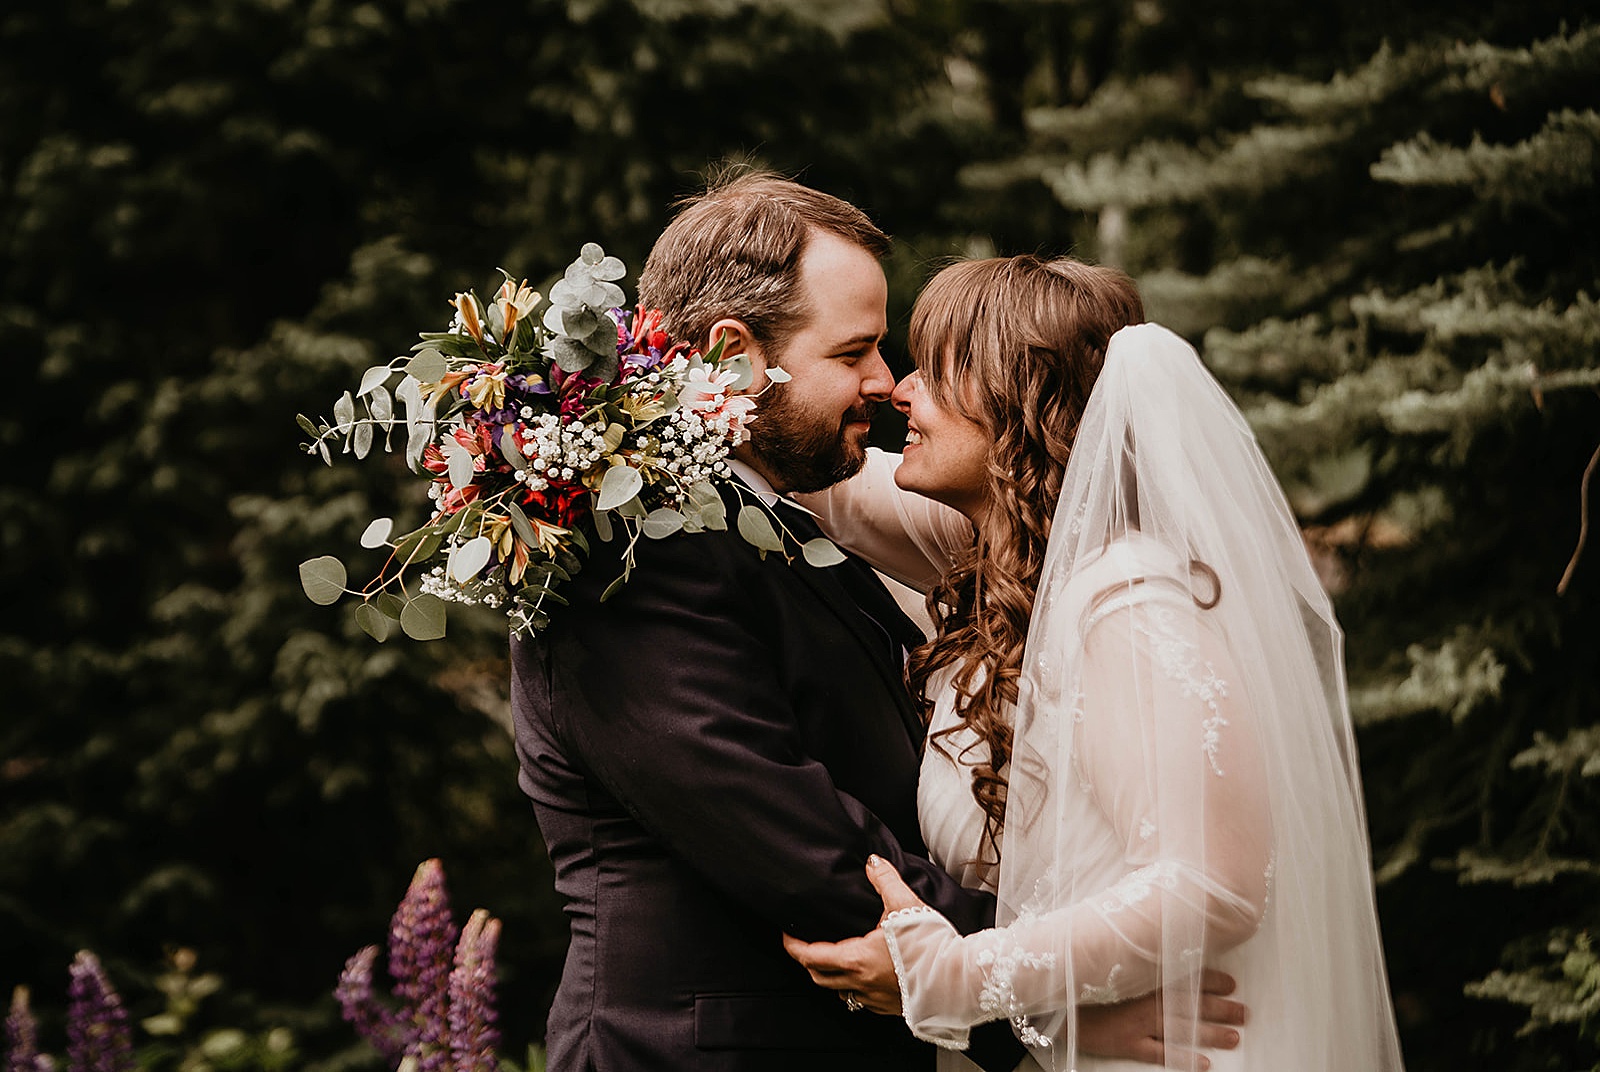 Rustic Colorado Elopement Bride and Groom Portraits by Krystal Capone Photography